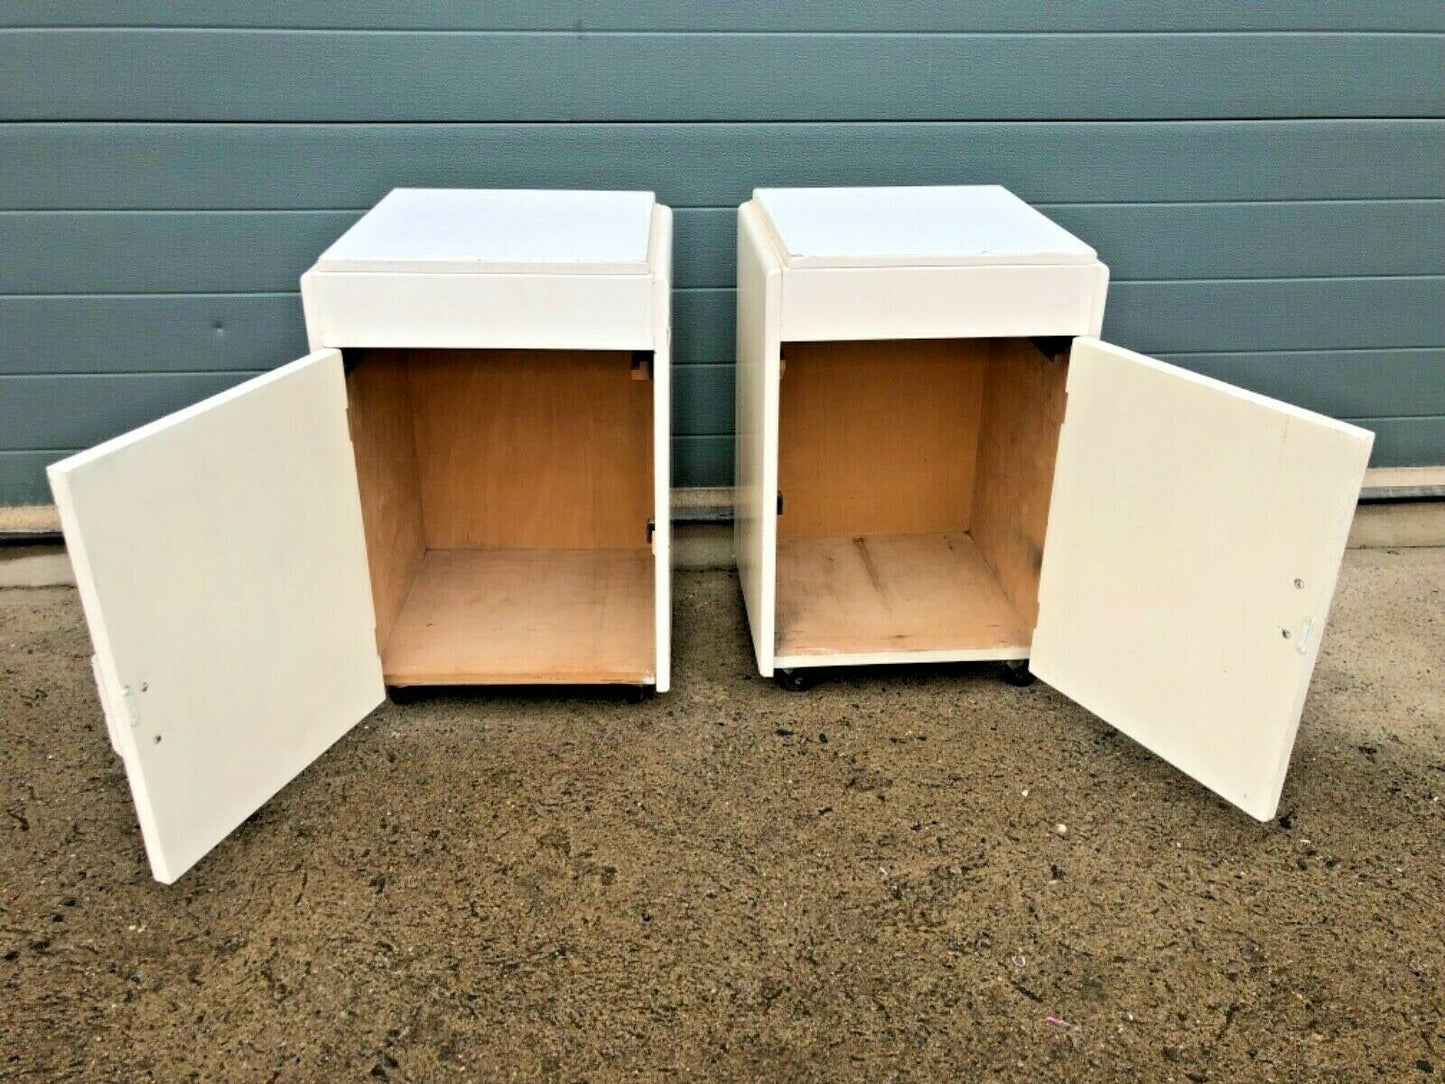 000996.....Unique Funky Pair Of Upcycled Bedside Cabinets / Bedside Lamp Tables